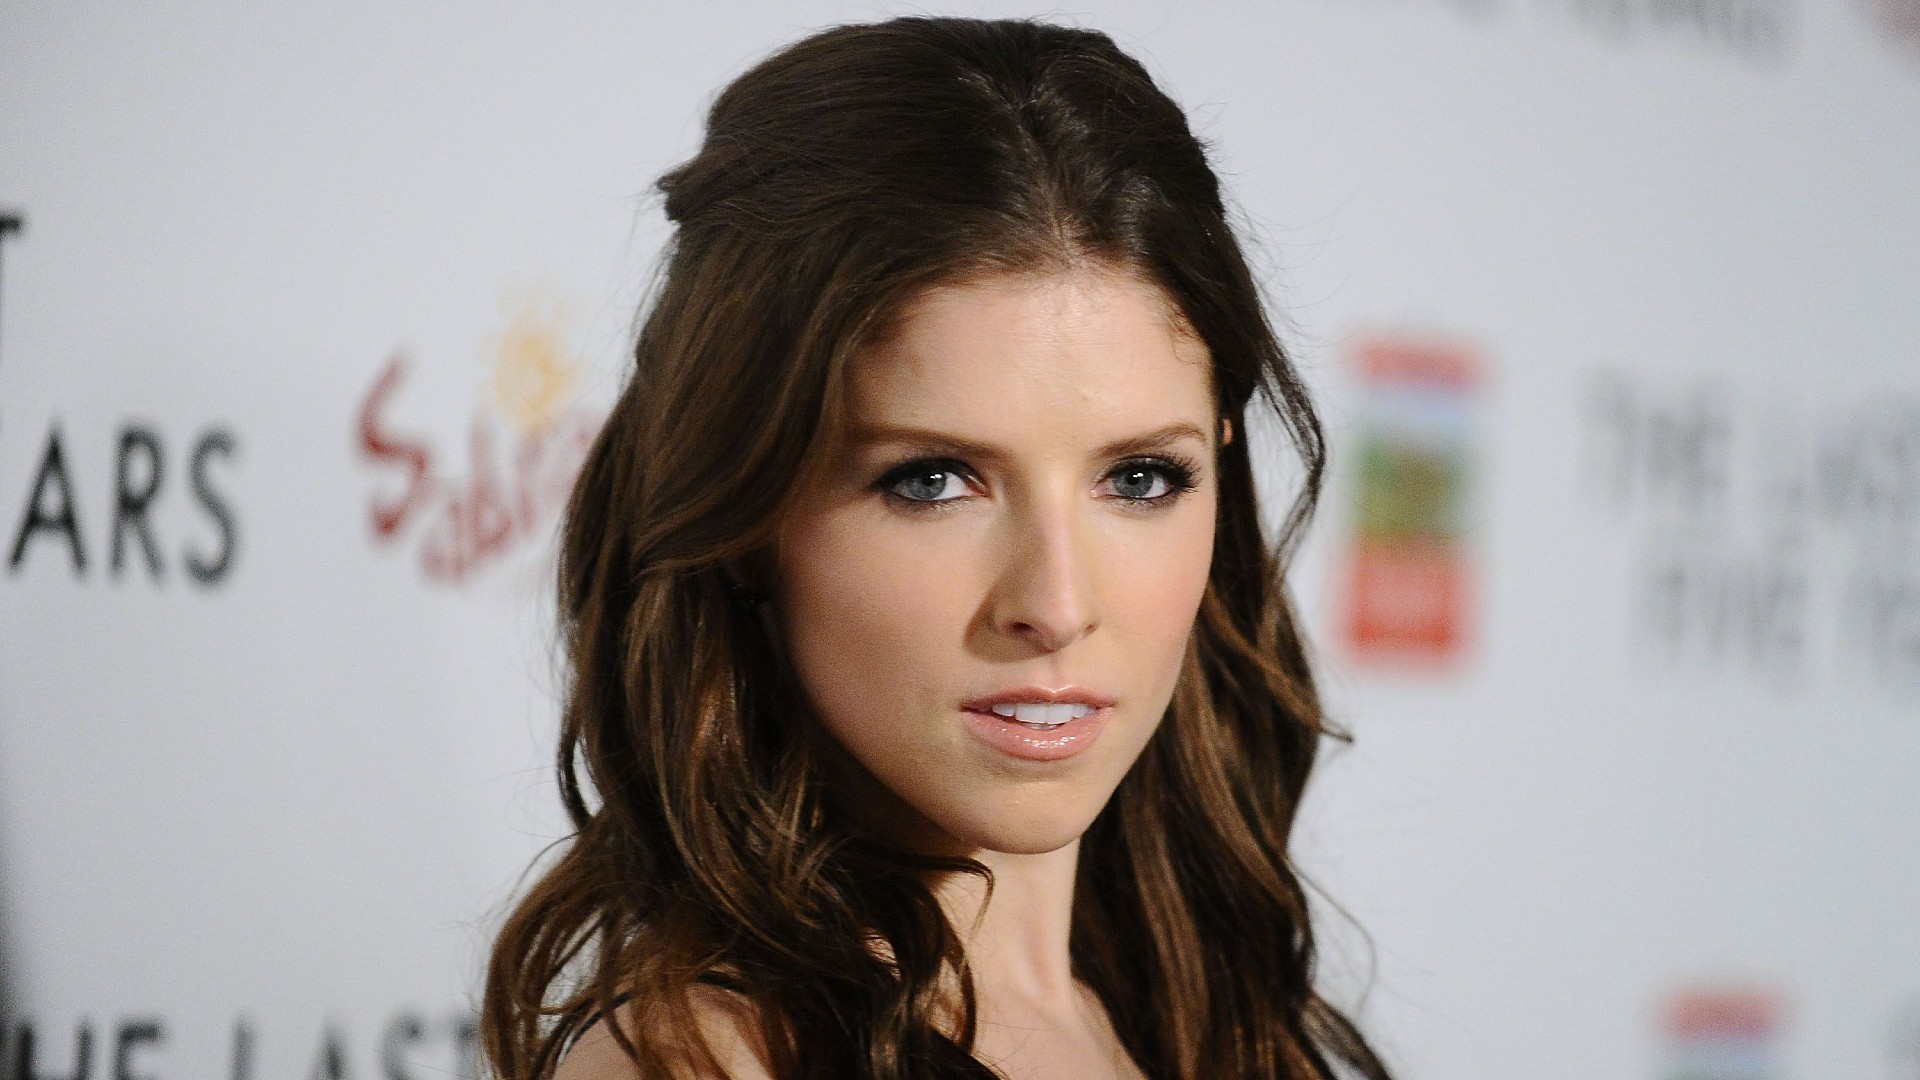 1920px x 1080px - Anna Kendrick Pitch Perfect 2 Poster Meme #BossPitch | Marie Claire